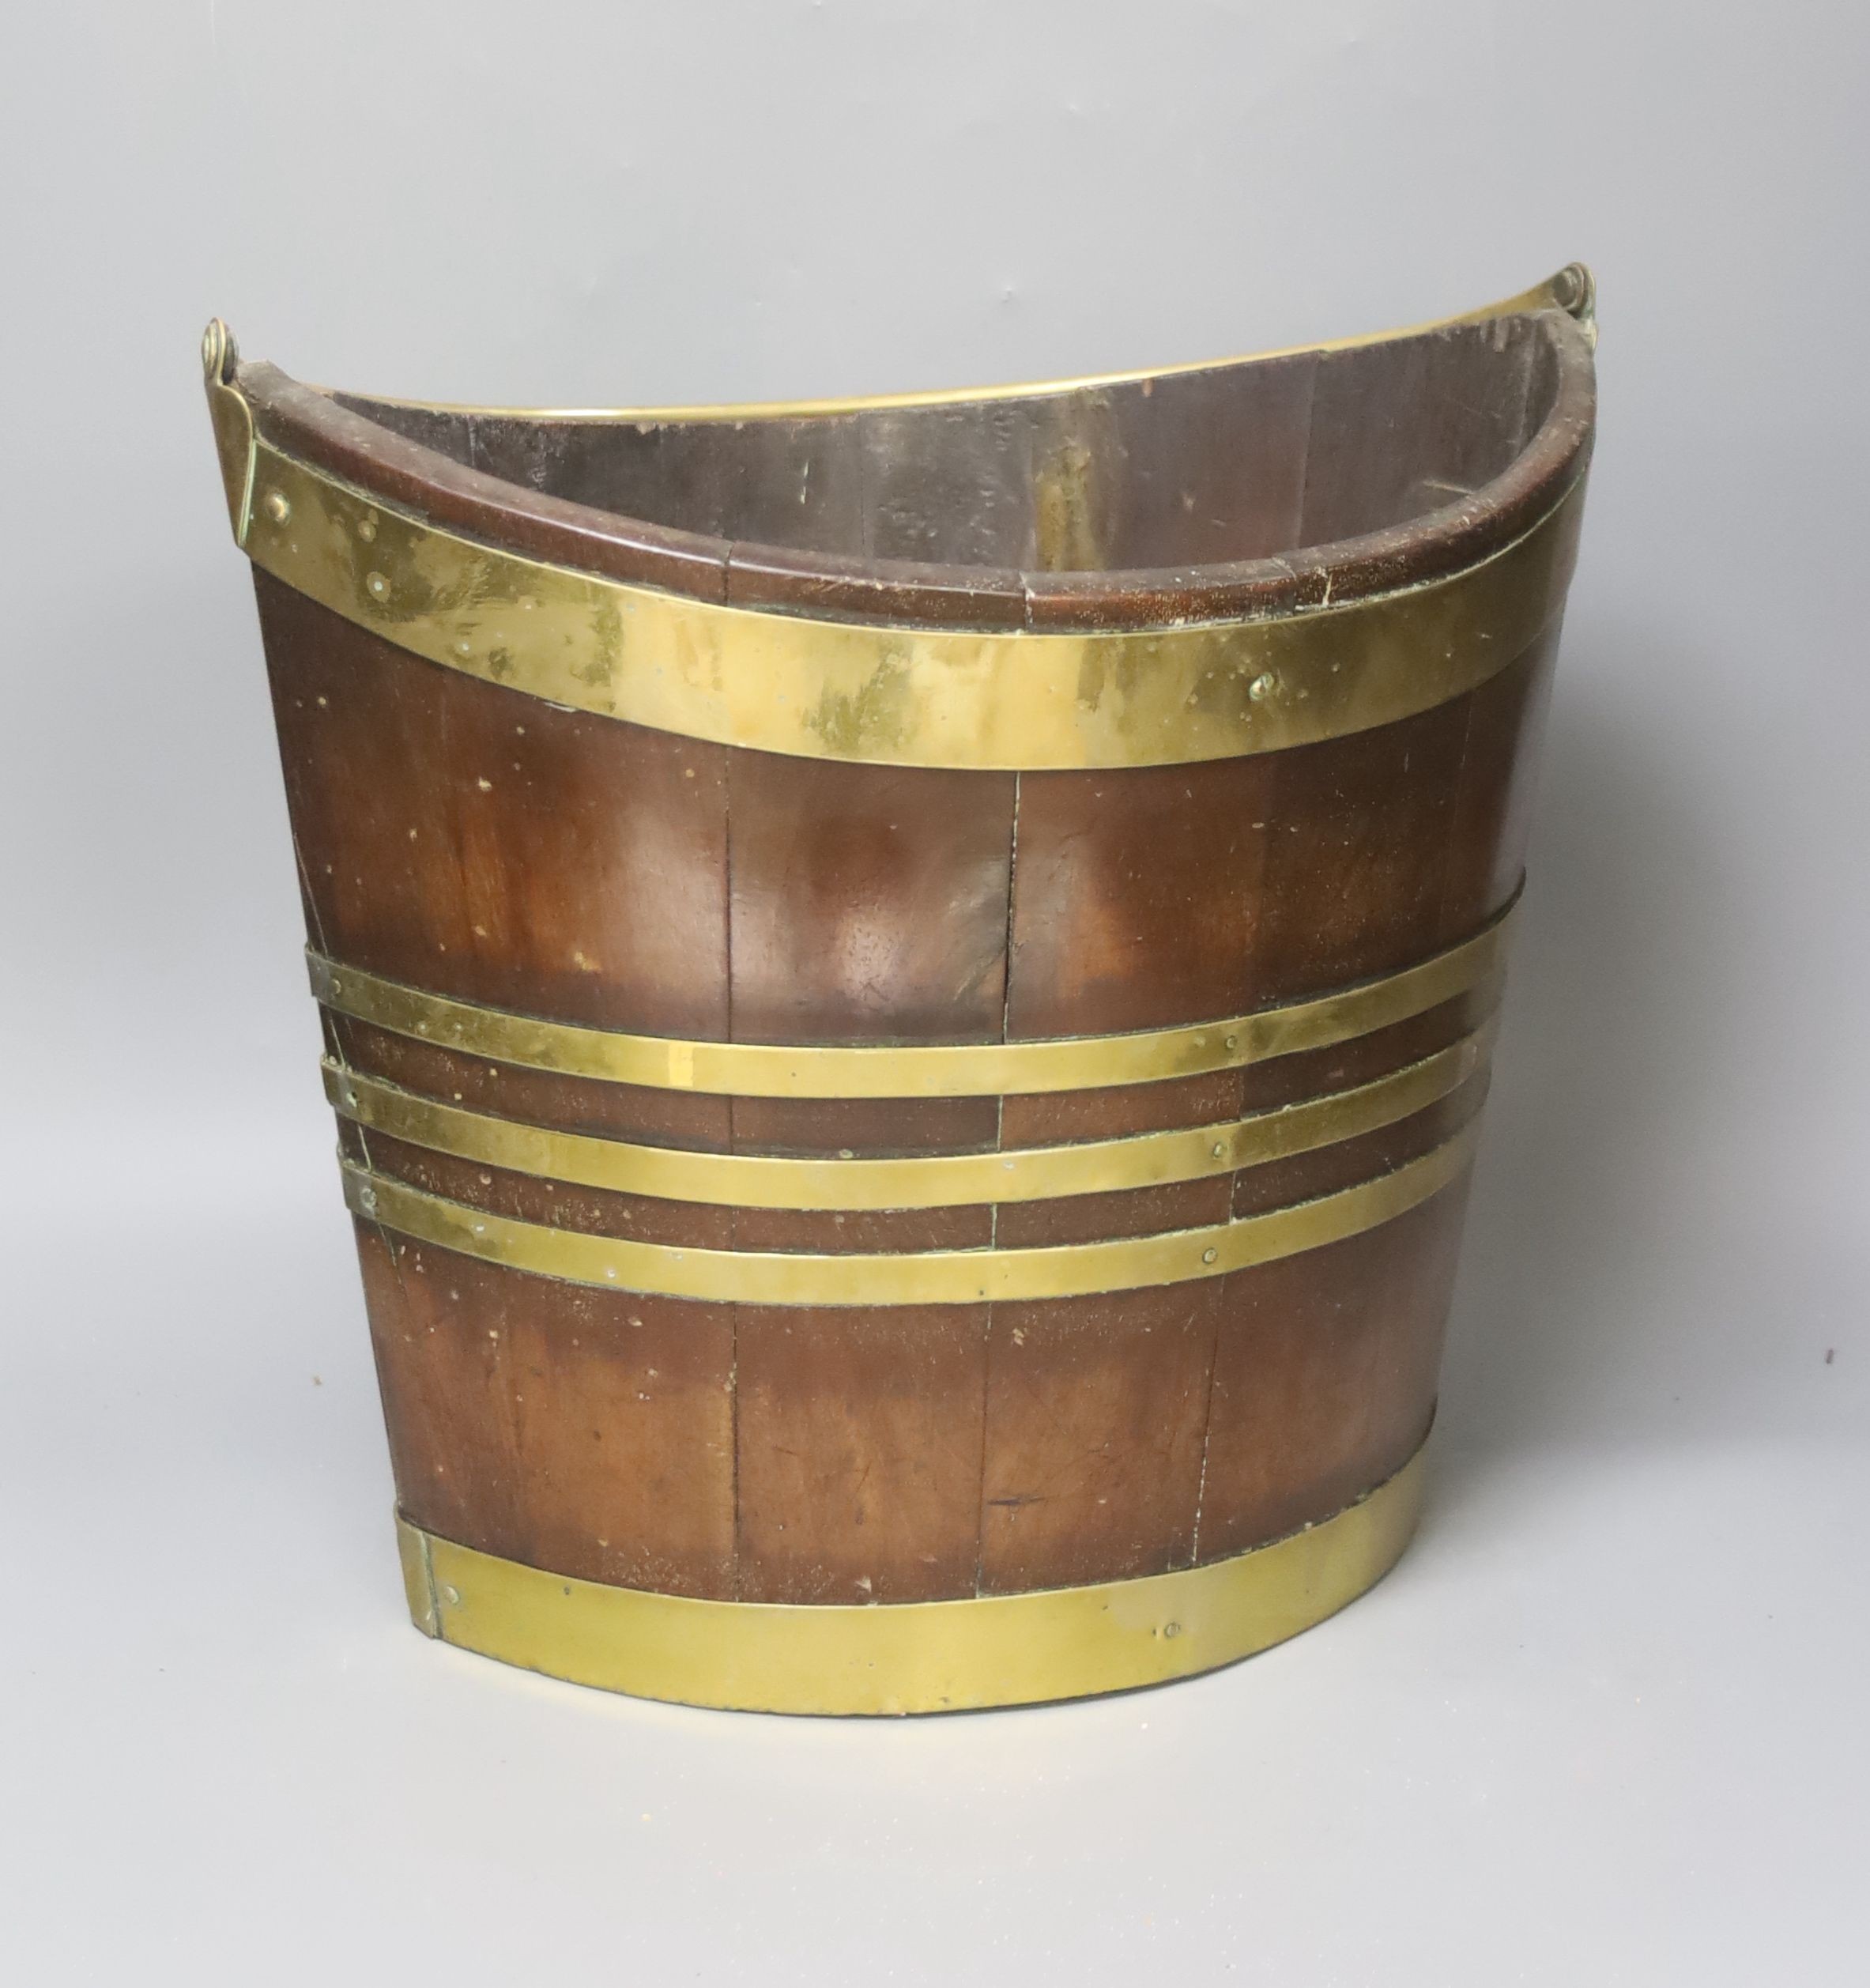 An early 19th century Dutch mahogany and brass bound oyster or peat bucket 33cm